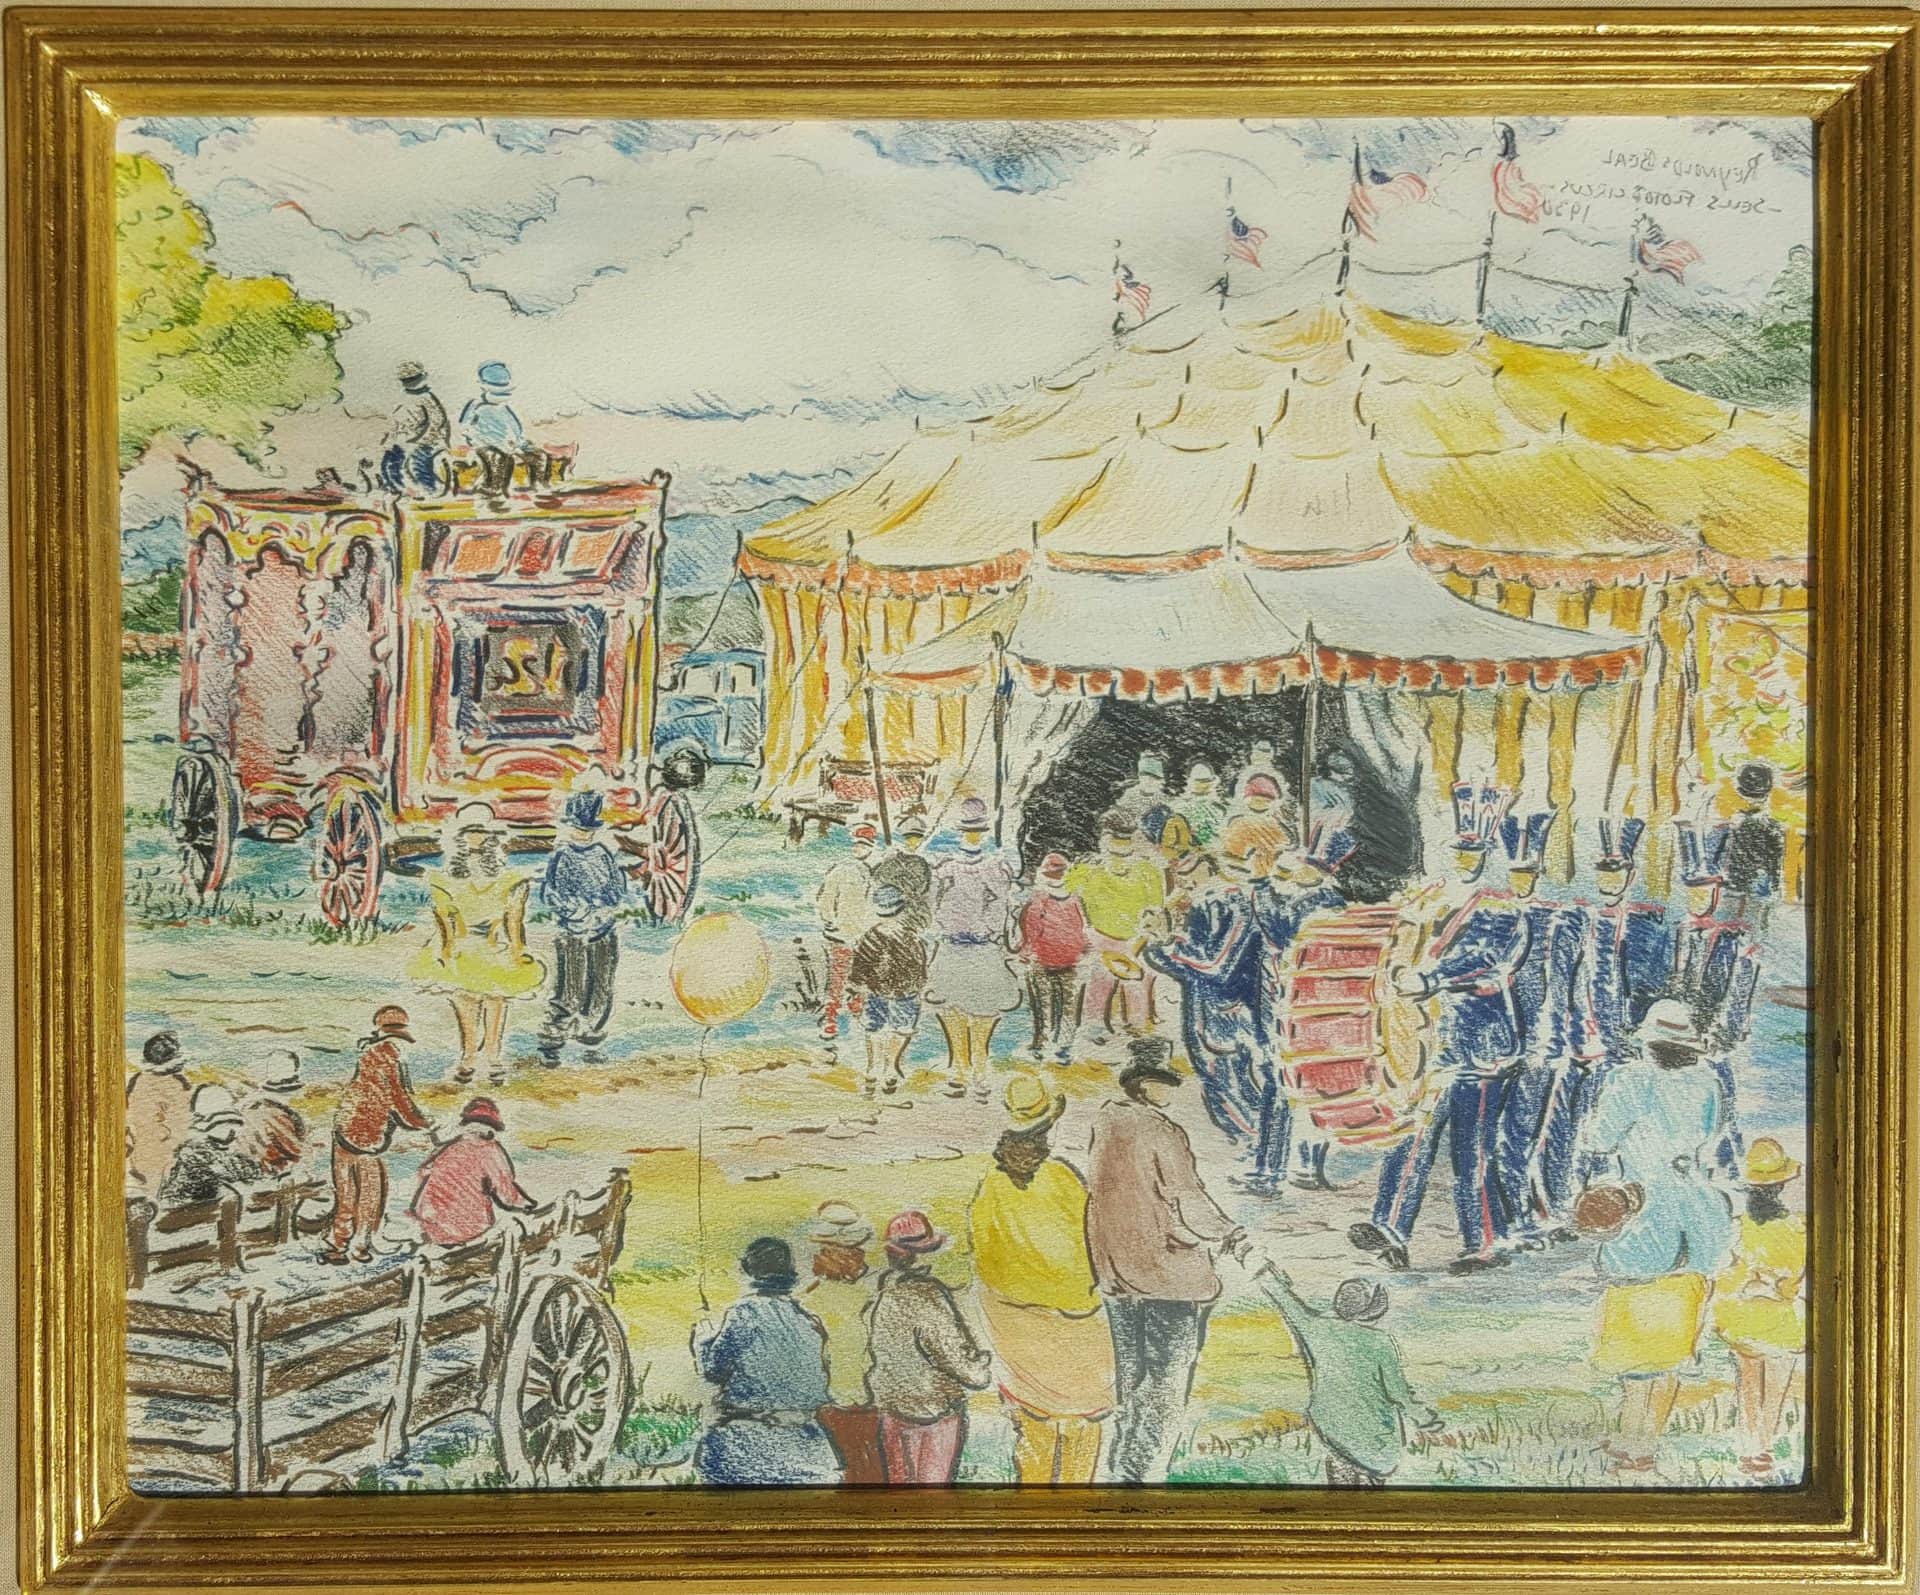 Beal. The Sells Floto Circus. Crowds gather to enter the big top - drawn in yellow. A blue uniformed marching band parades in front, and a heavily decorated wagon sits beside.